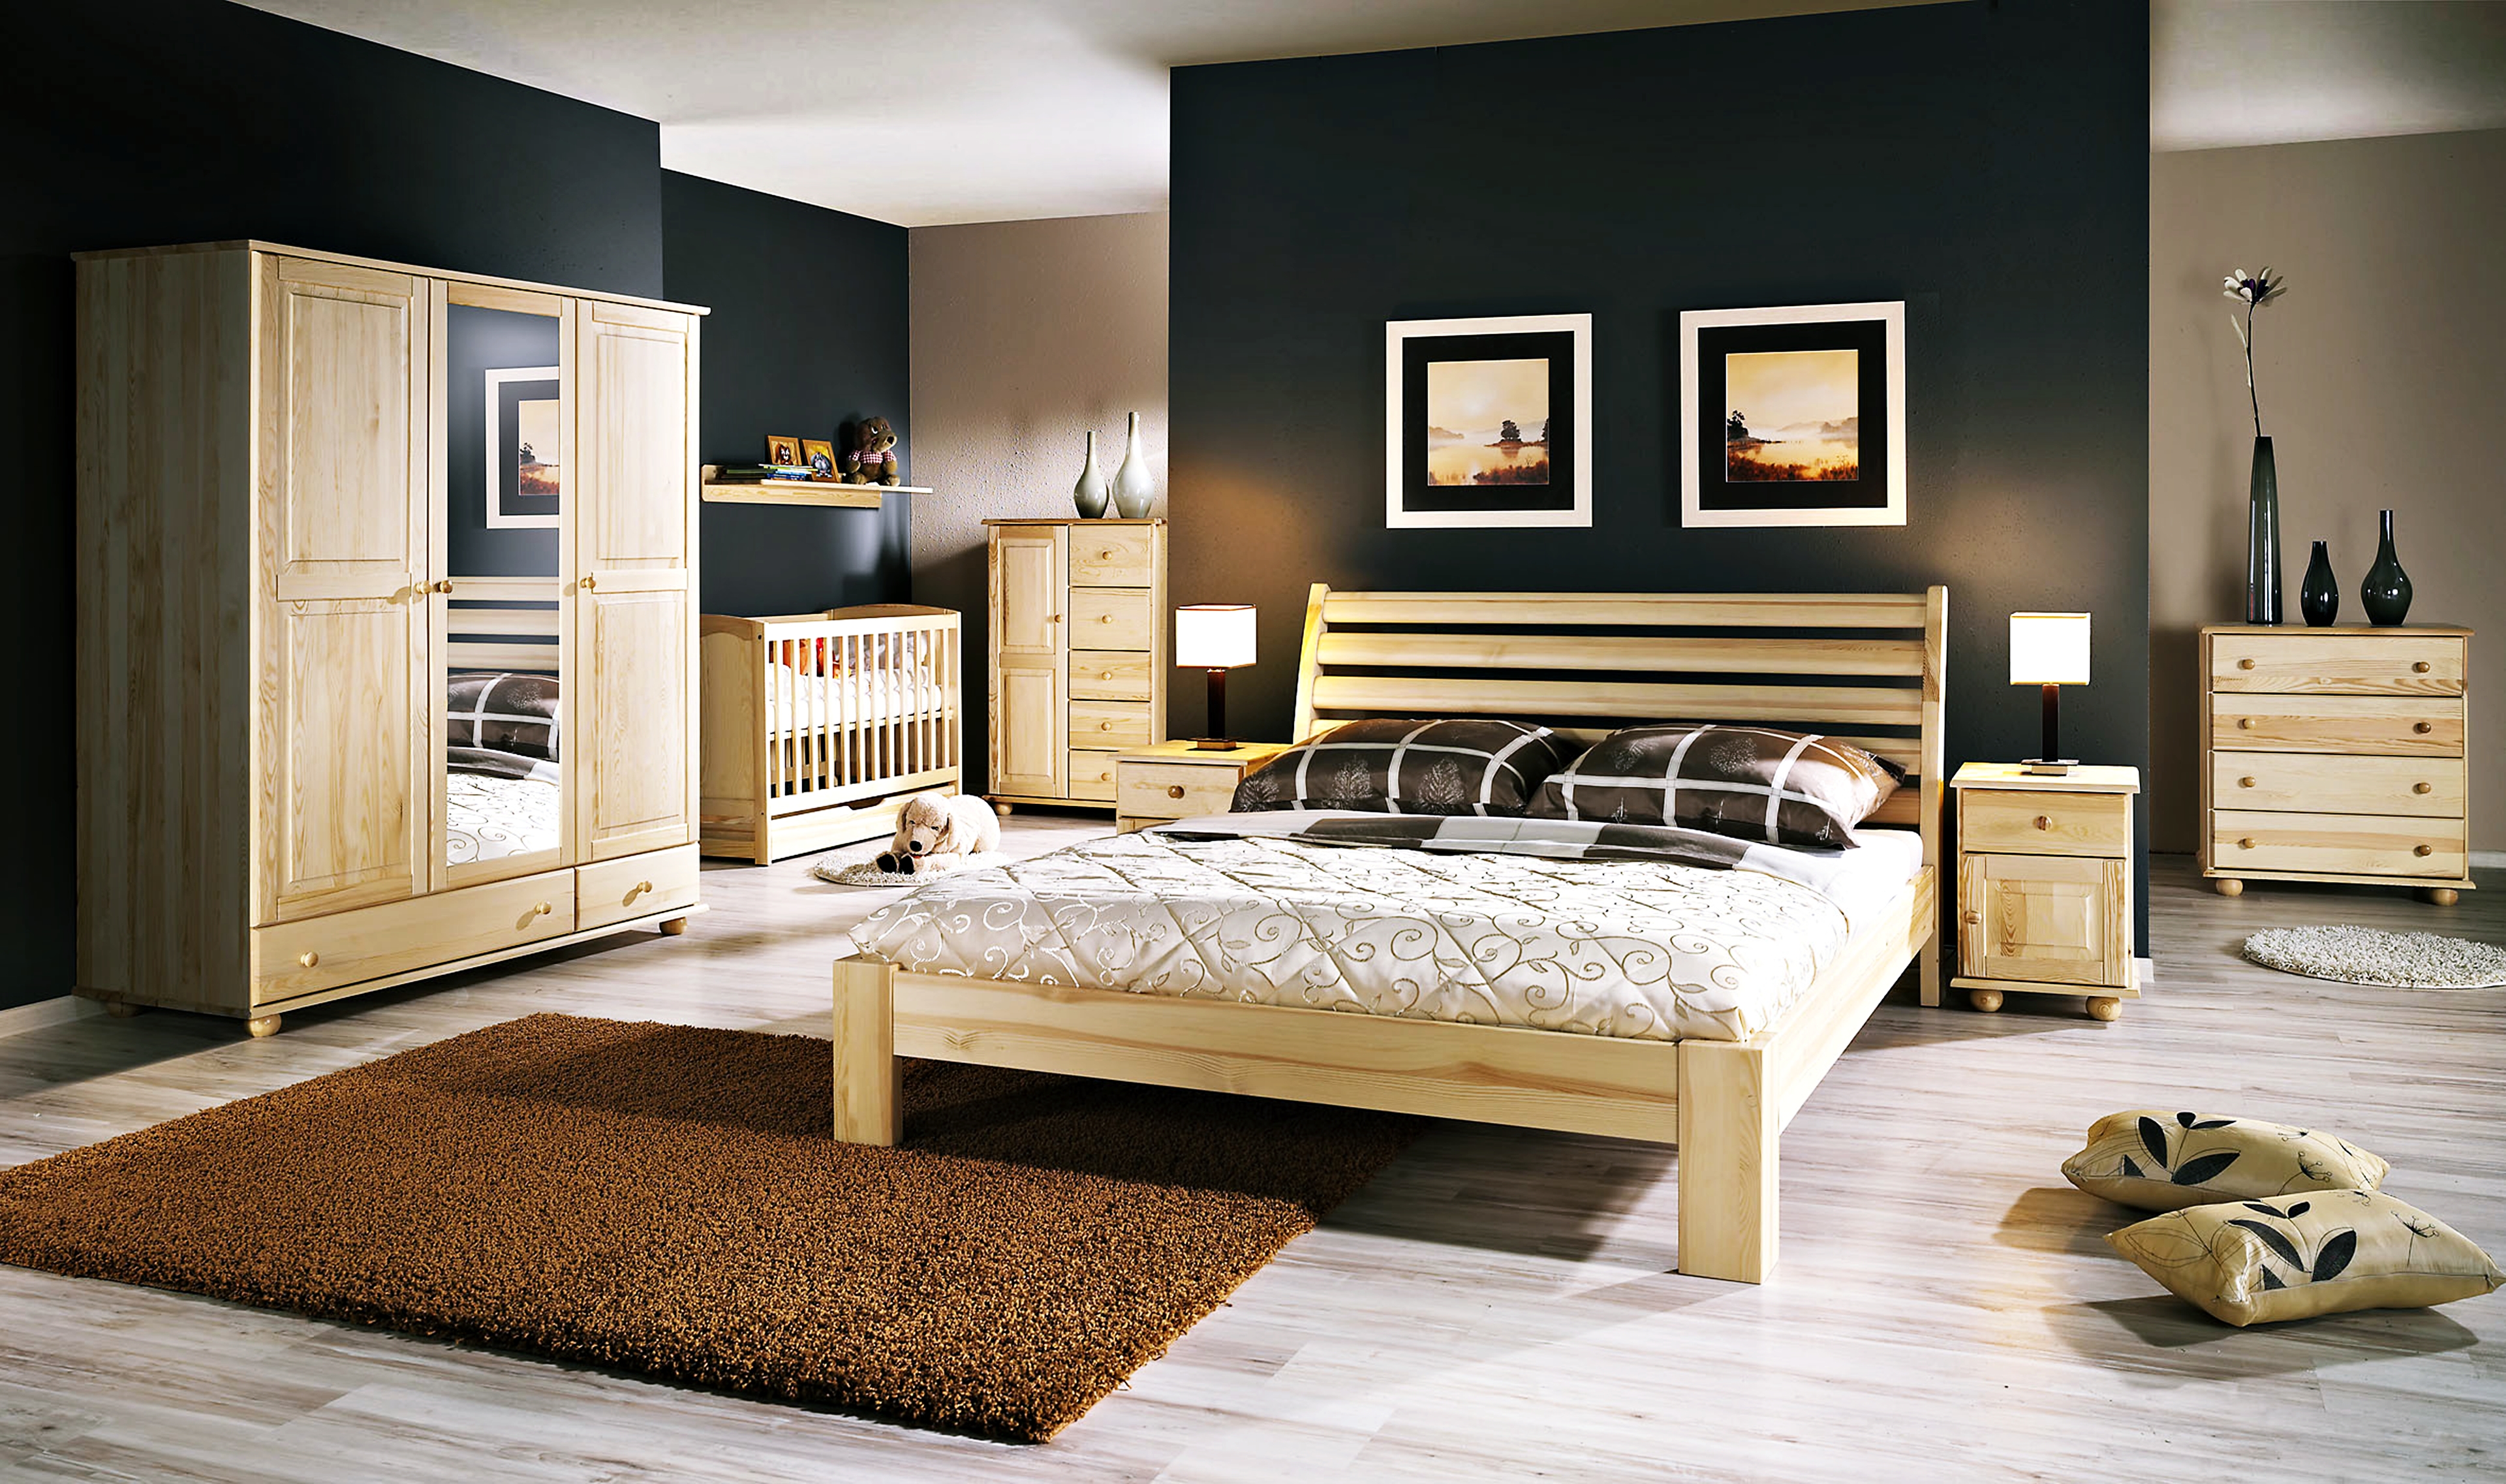 furniture, man made, room, bedroom, interior, style